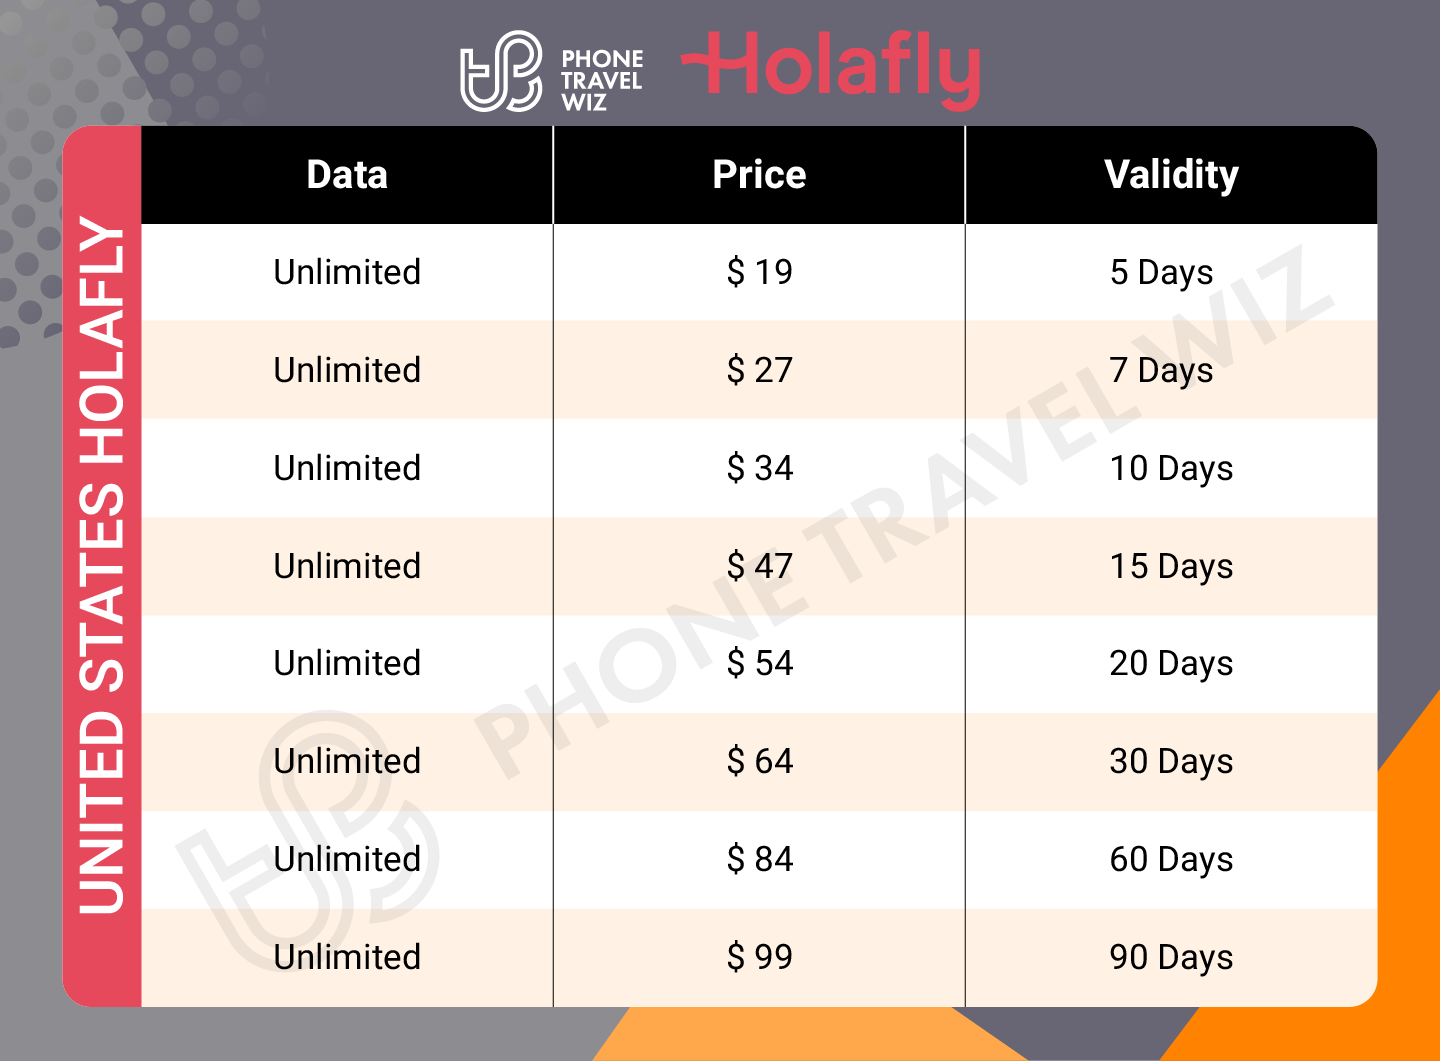 Holafly United States eSIM Price & Data Details Infographic by Phone Travel Wiz